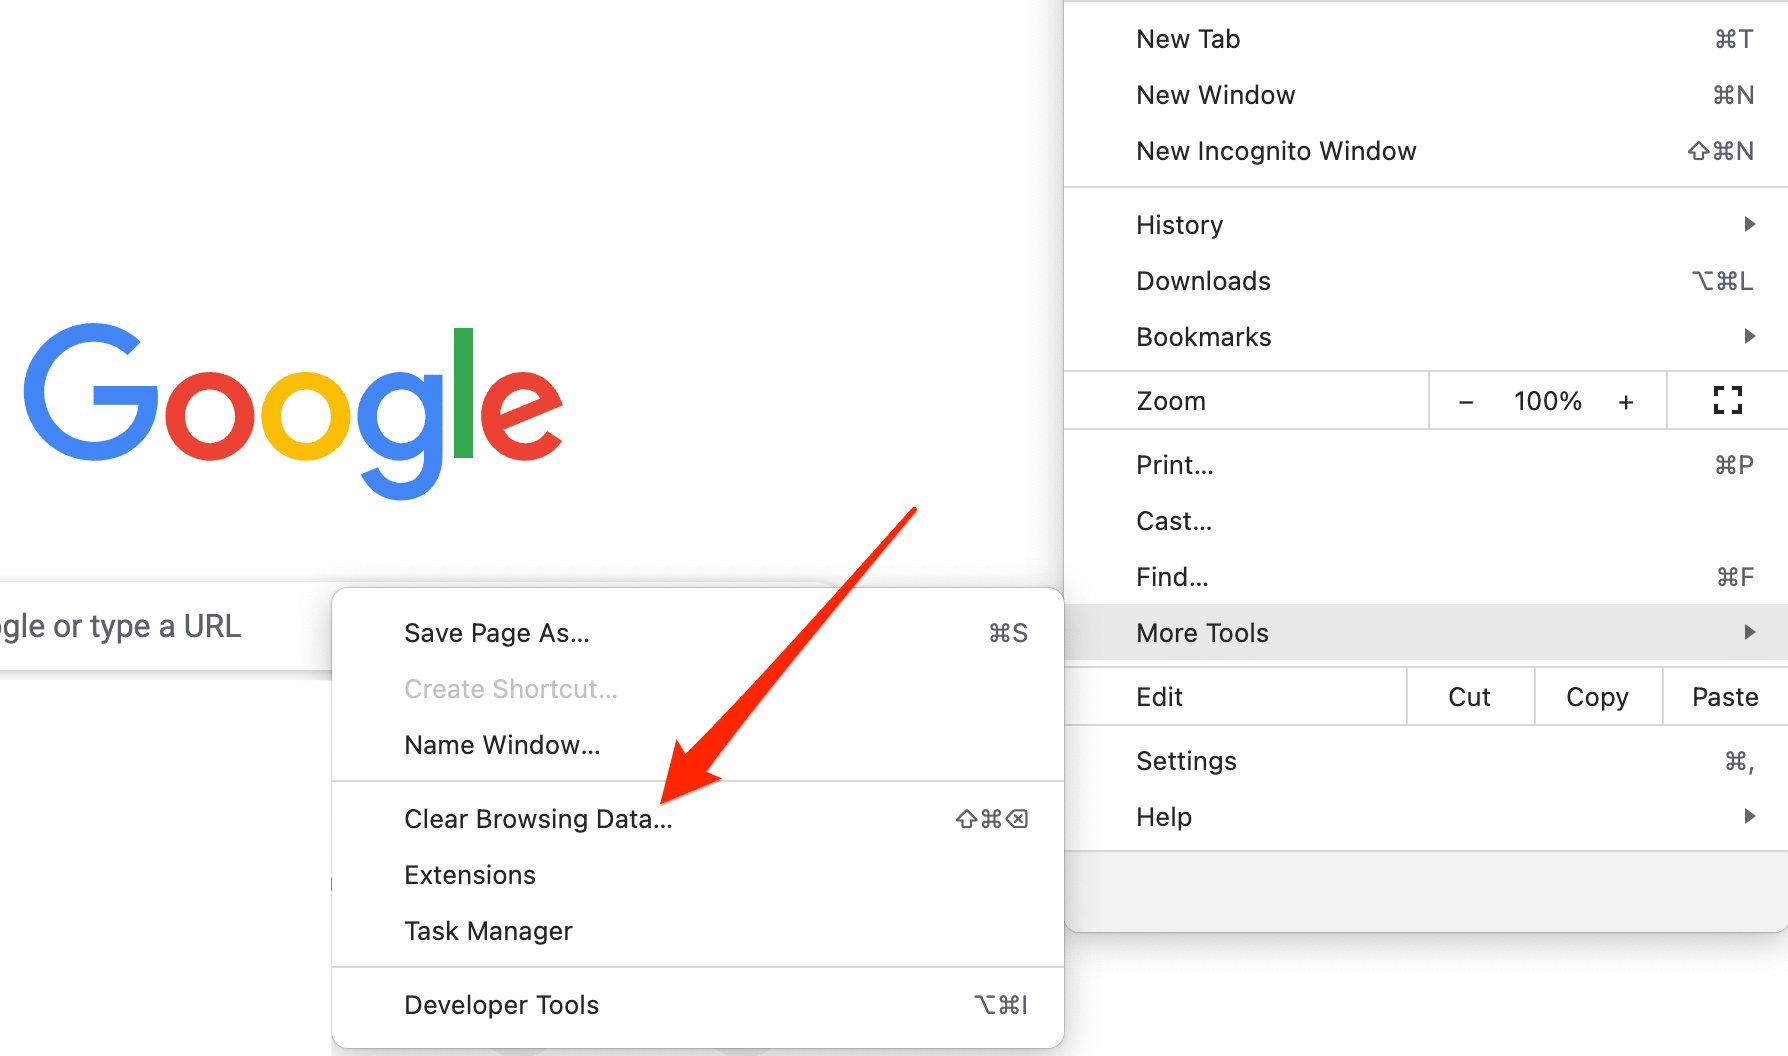 Clear browsing data on Google Chrome